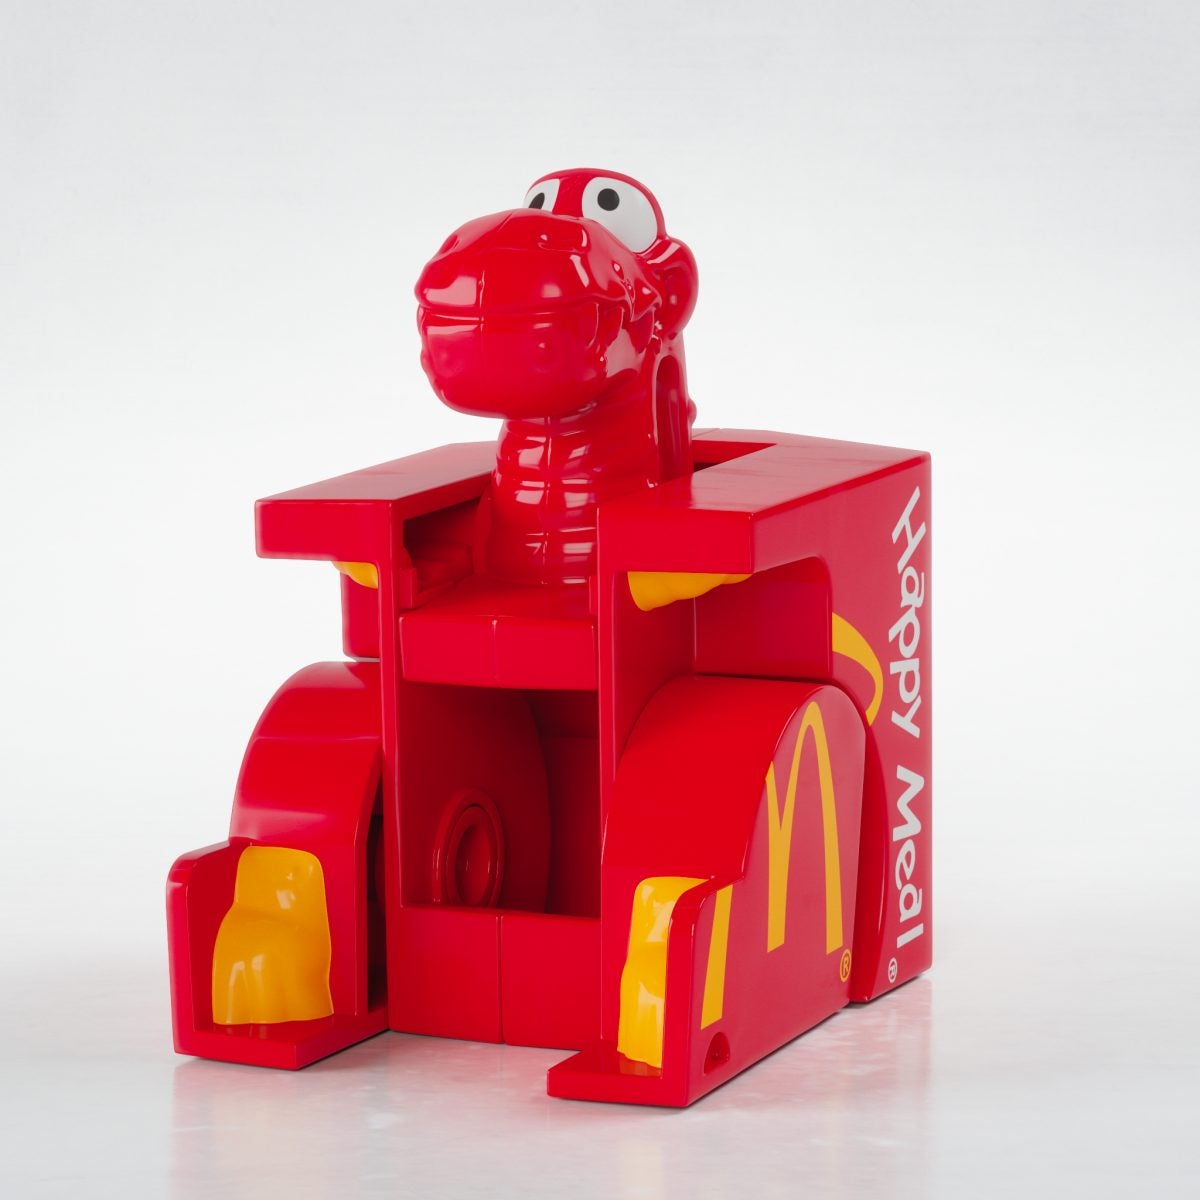 Iconic Mcdonald's Happy Meal Toys From Our Childhood Available From Nov 28 &Amp; We're Feeling Nostalgic - World Of Buzz 8